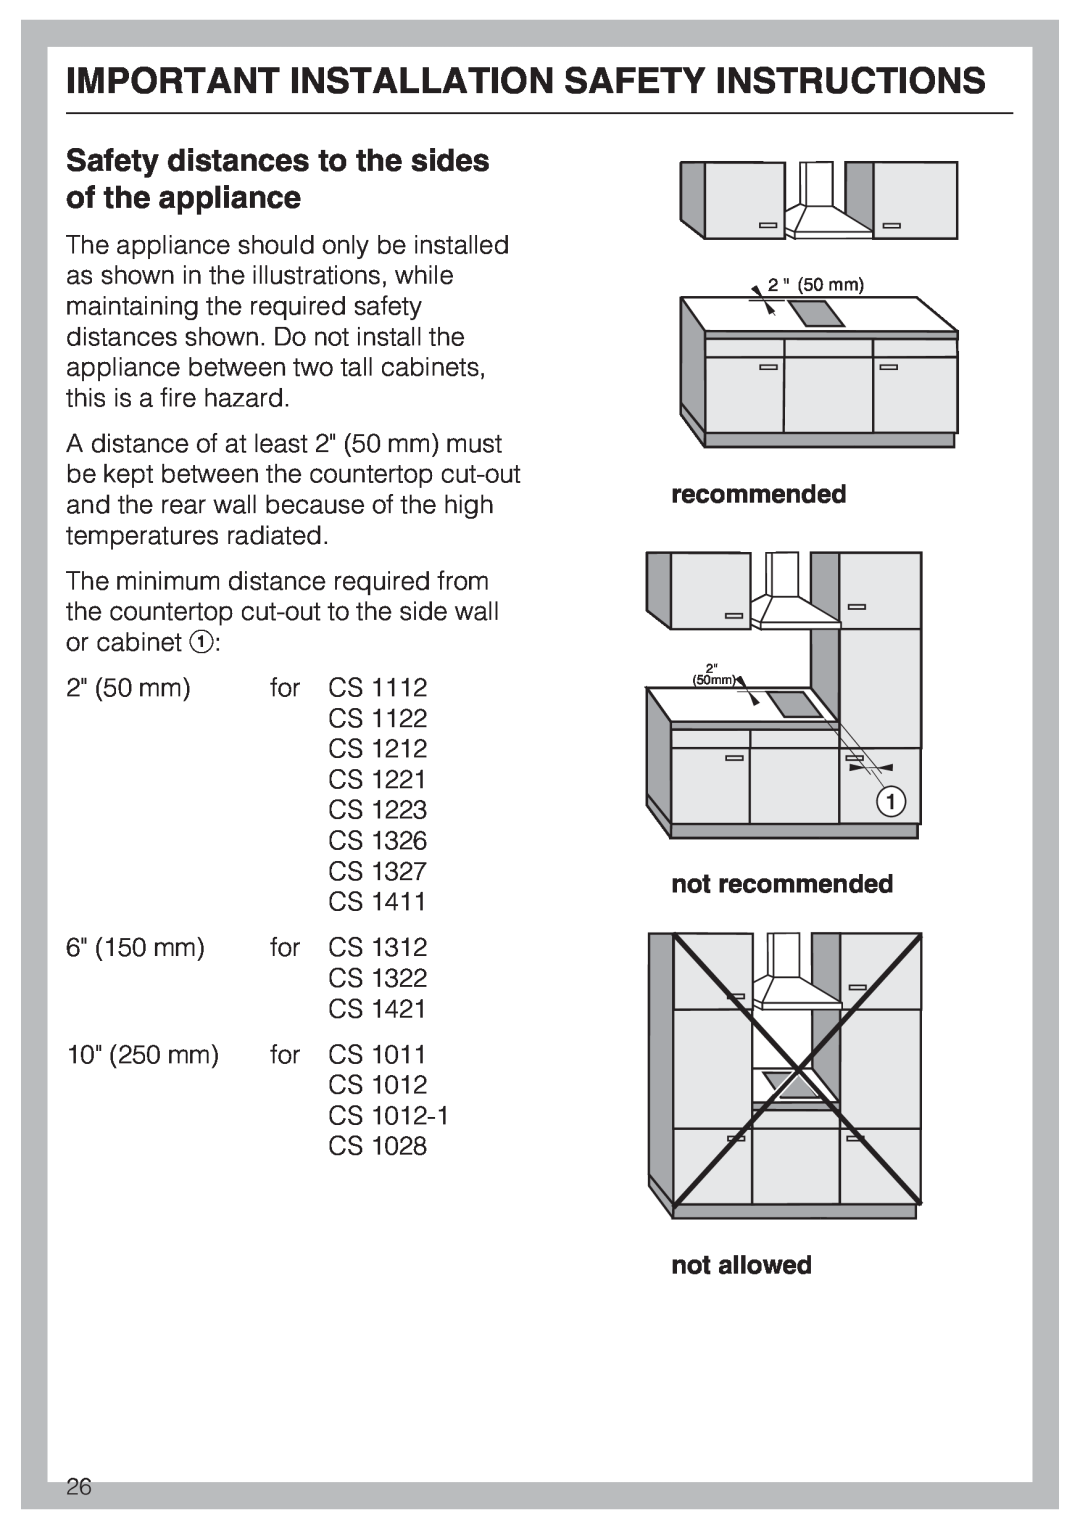 Miele CS 1122 Safety distances to the sides of the appliance, Important Installation Safety Instructions, recommended 